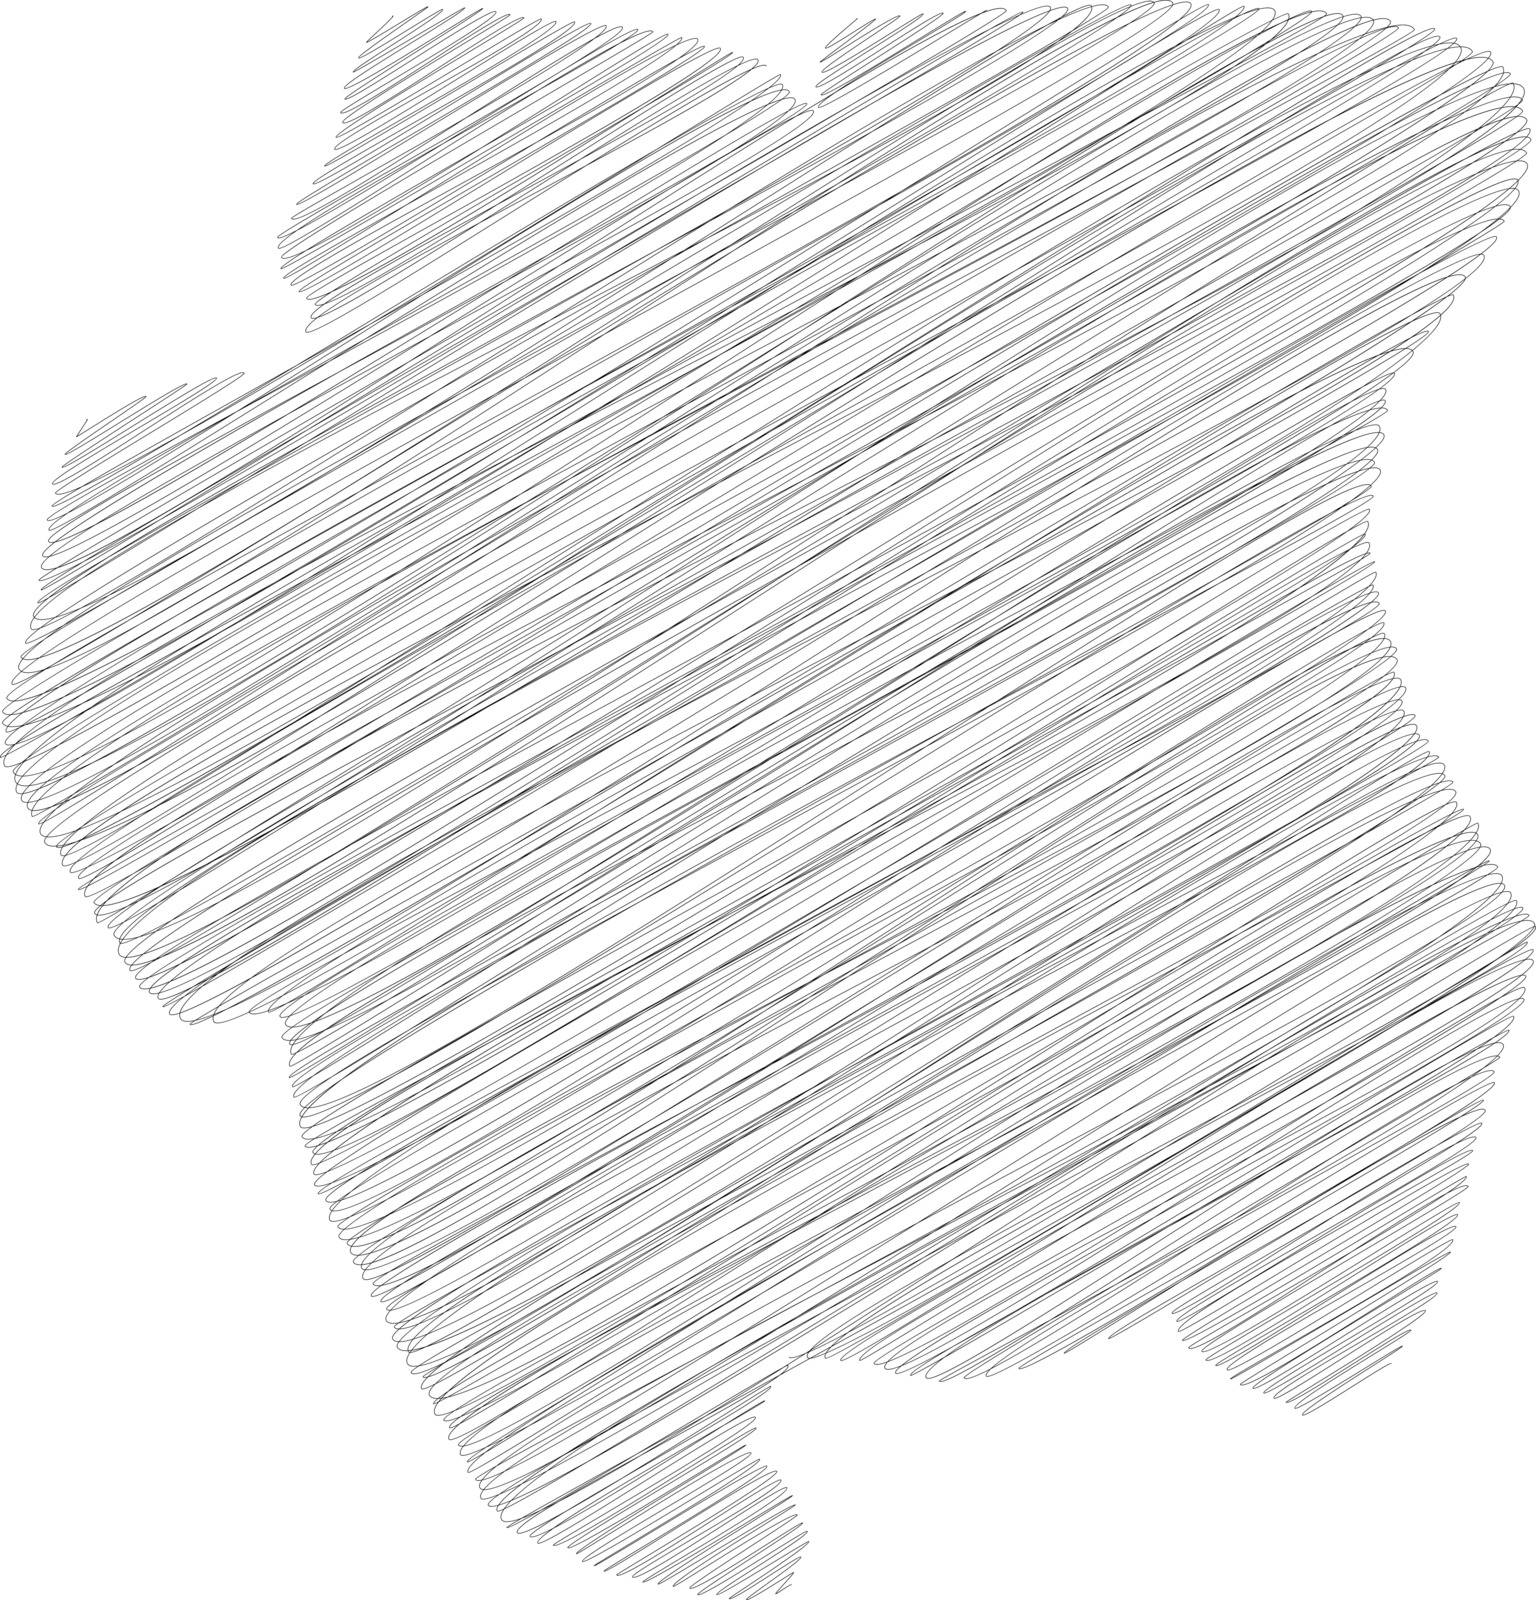 Surinam - pencil scribble sketch silhouette map of country area with dropped shadow. Simple flat vector illustration.